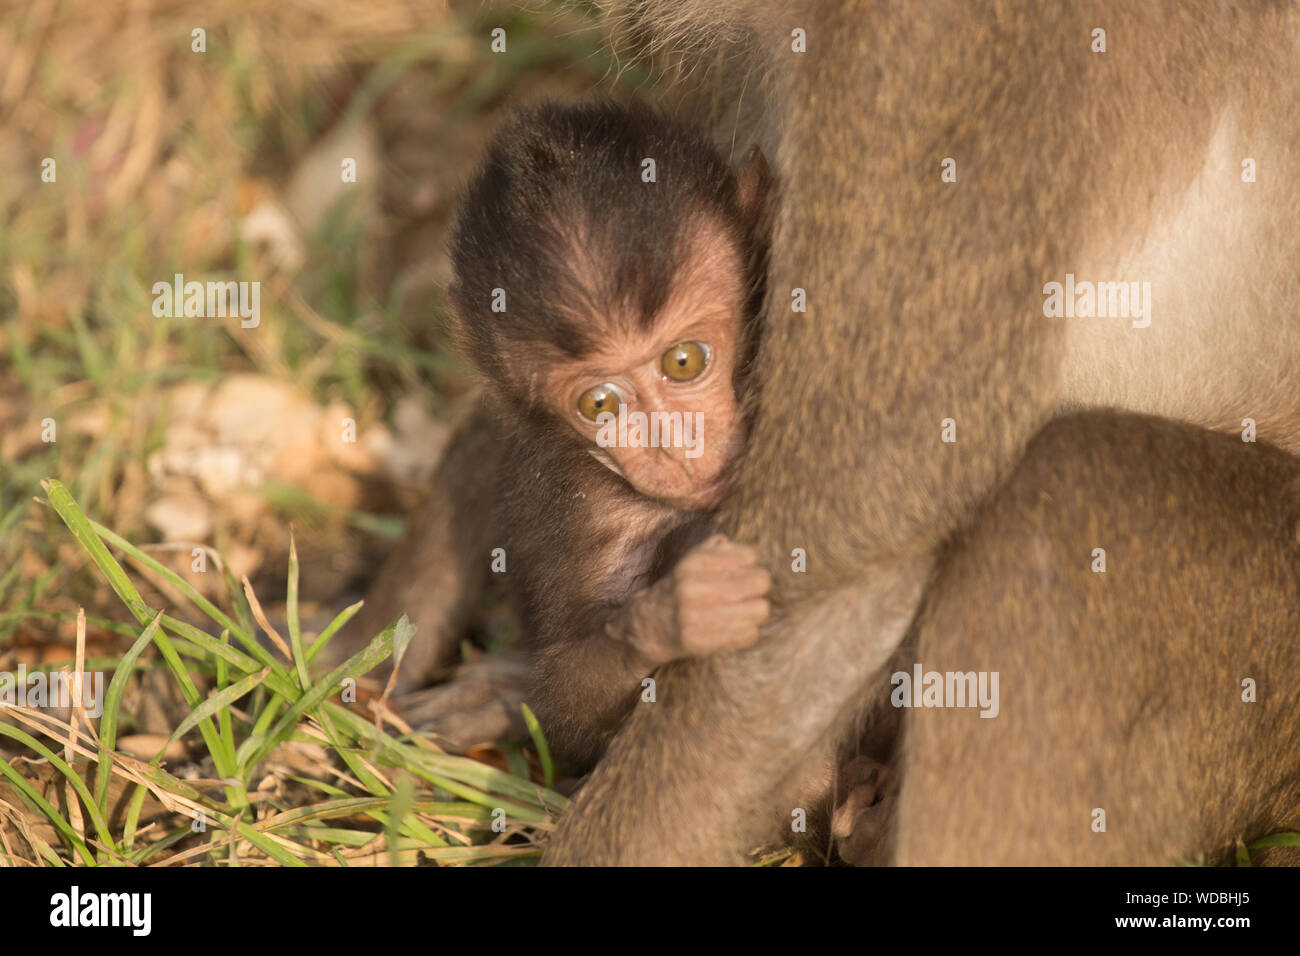 Portrait Of Baby Monkey Clinging On To Mother Stock Photo